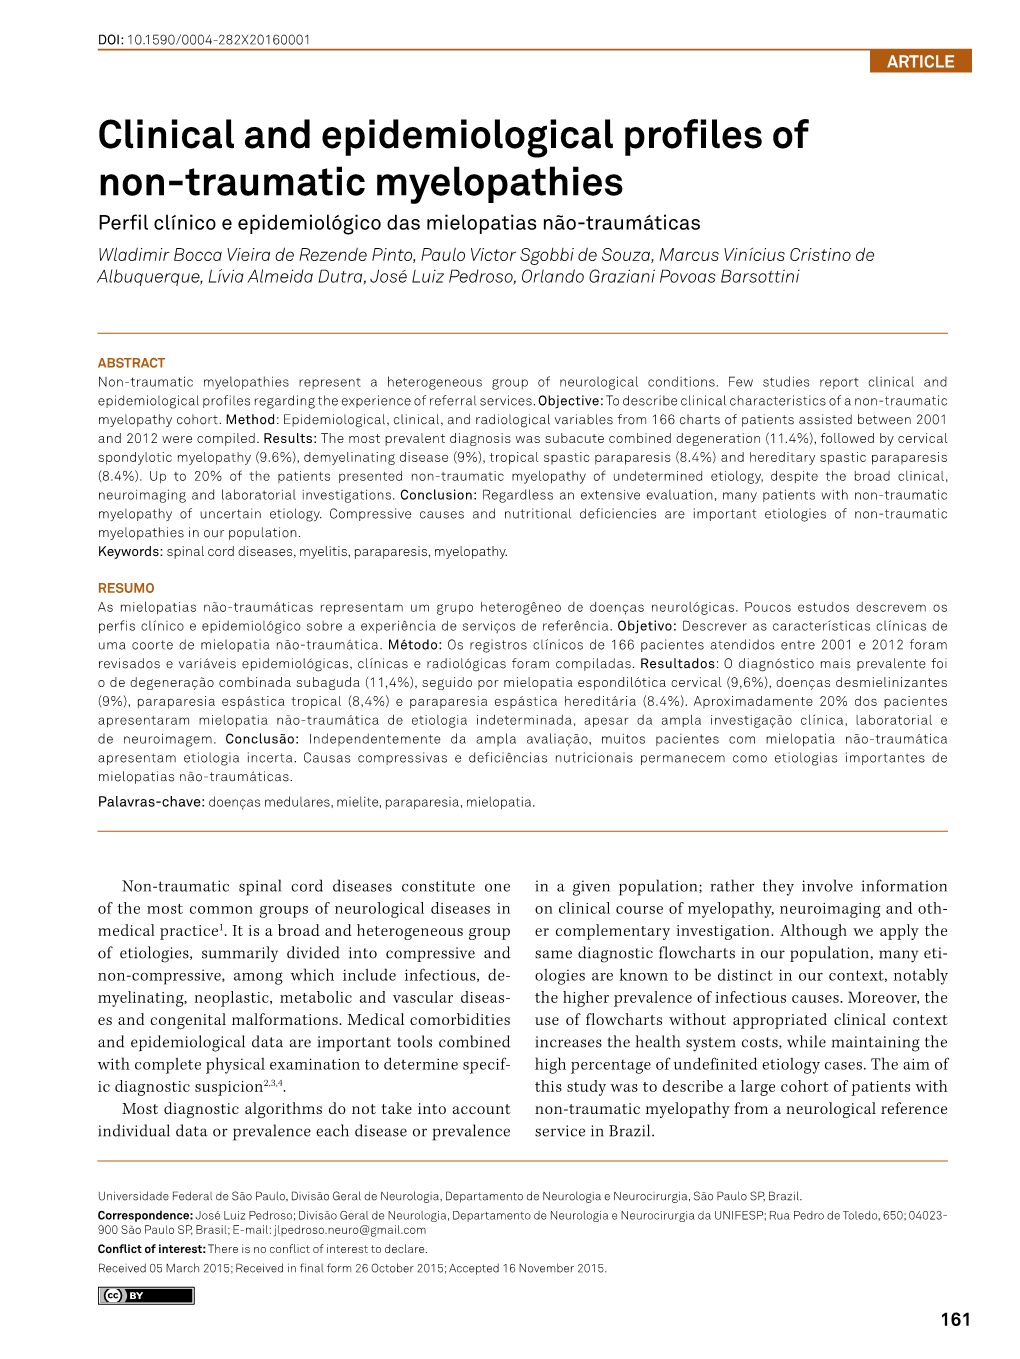 Clinical and Epidemiological Profiles of Non-Traumatic Myelopathies